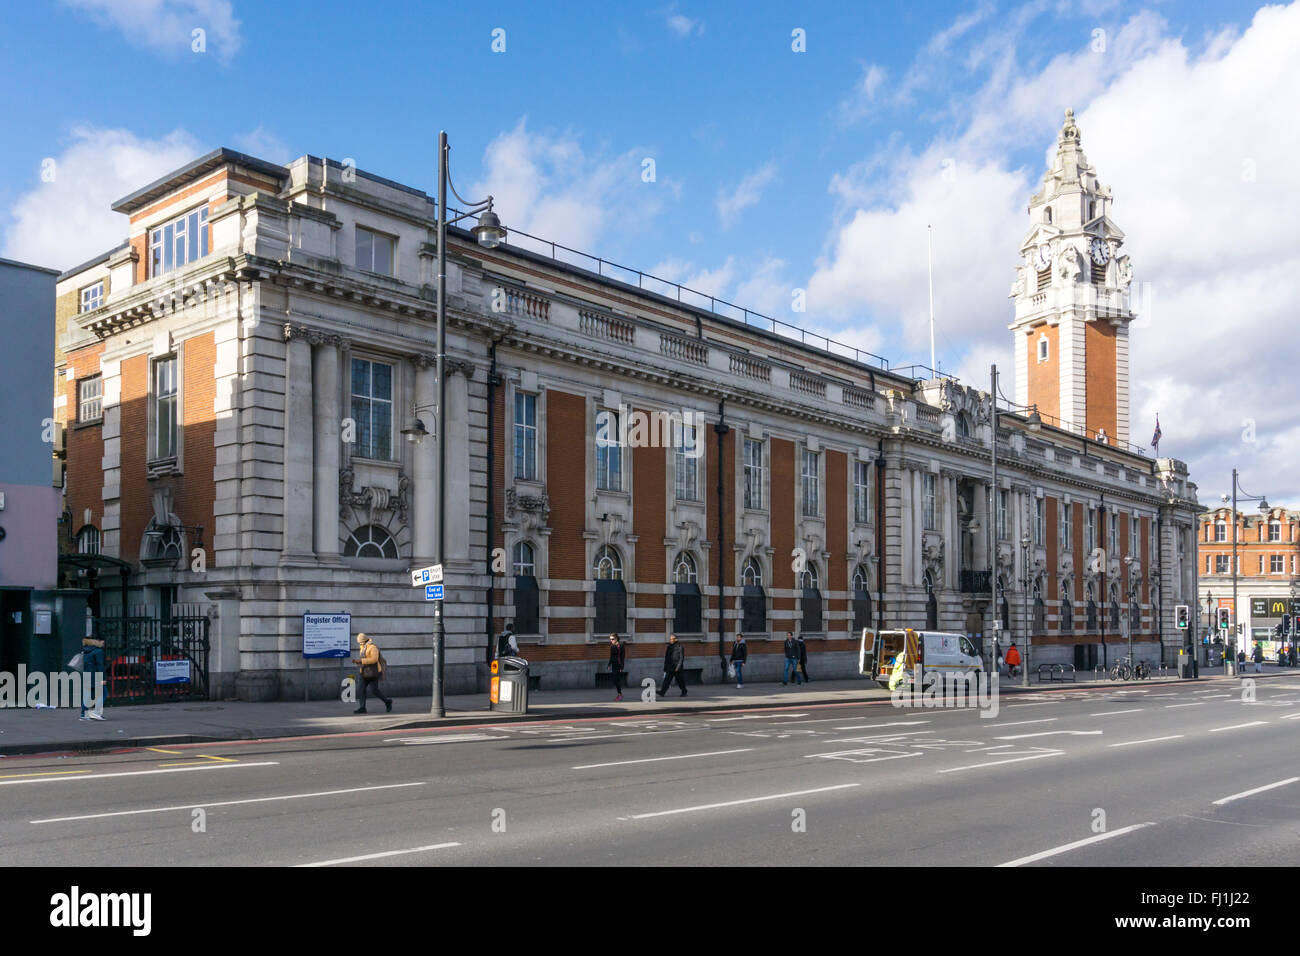 Lambeth Town Hall in Brixton, South London. Stock Photo